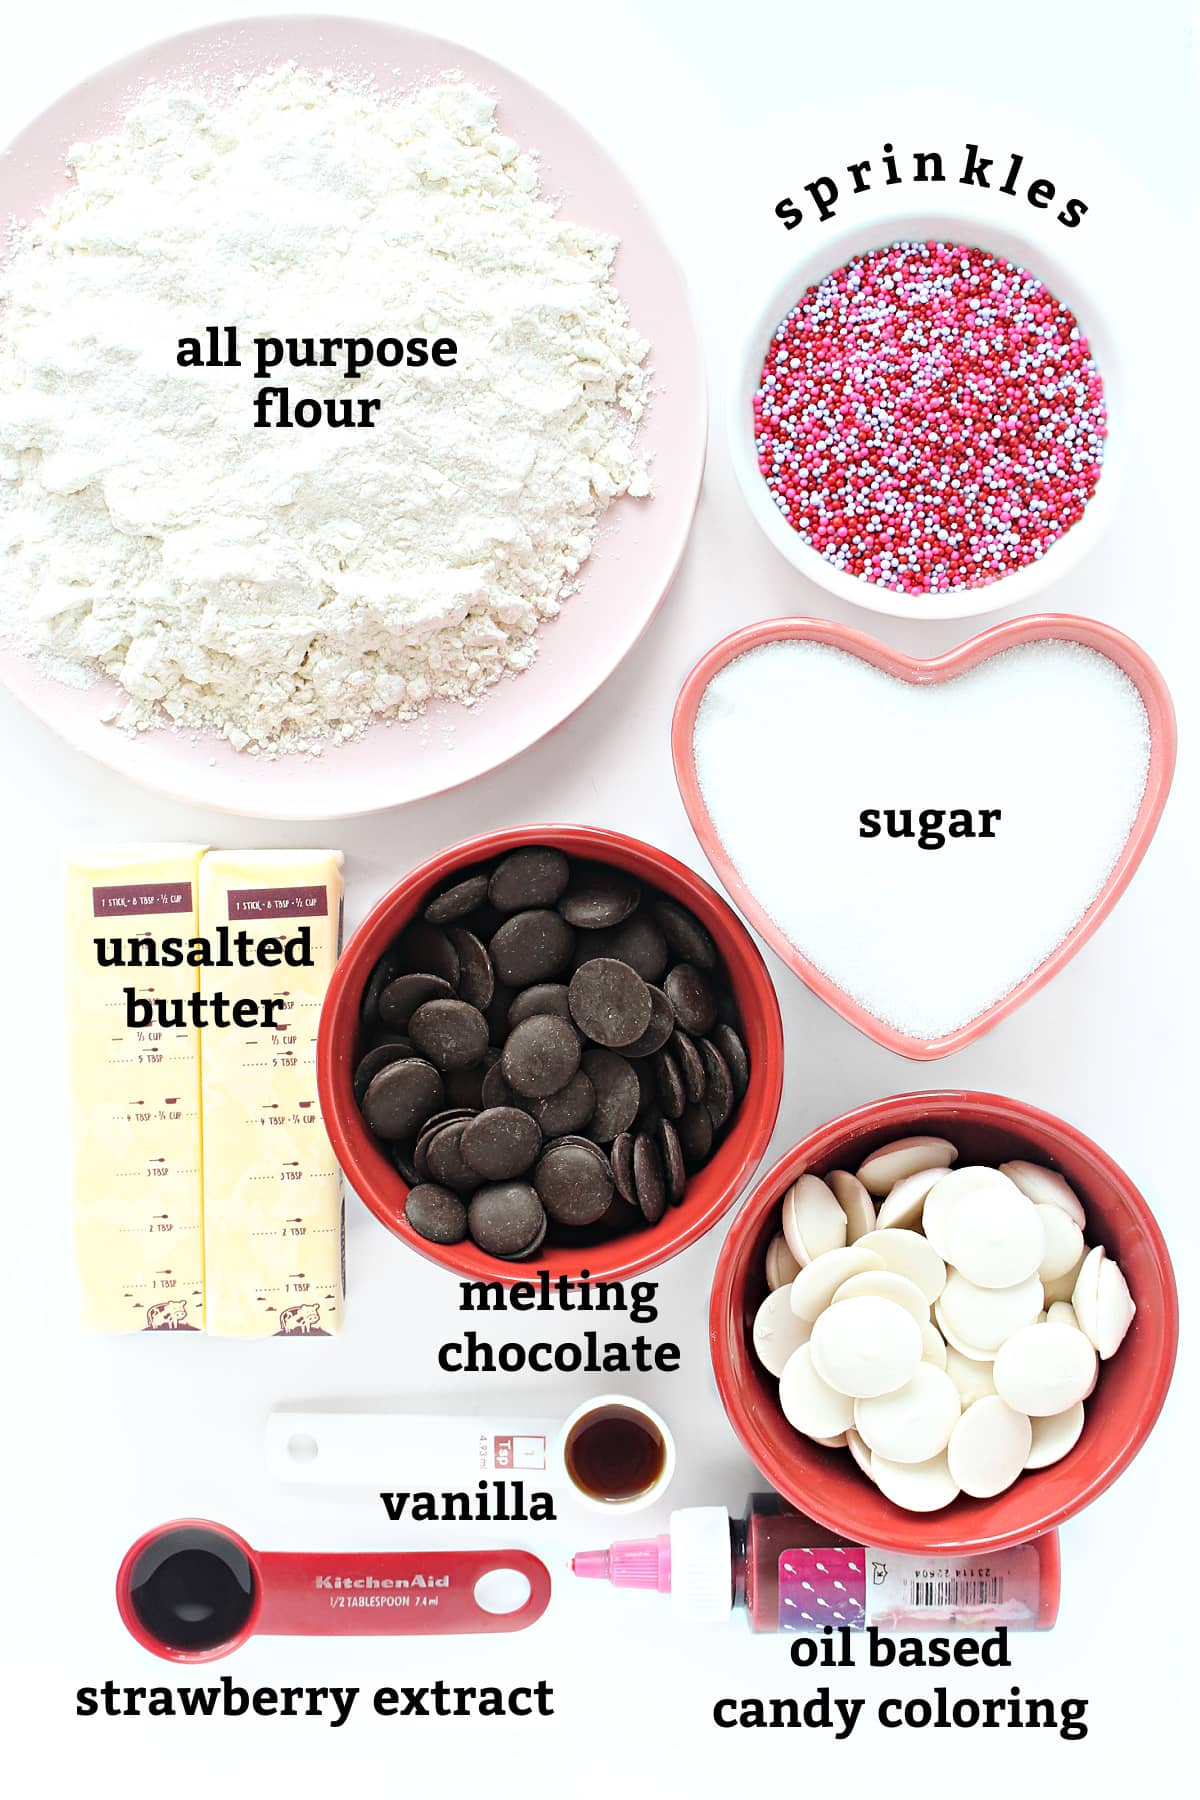 Ingredients: flour, sprinkles, unsalted butter, sugar, melting chocolate, strawberry extract, oil based candy coloring.